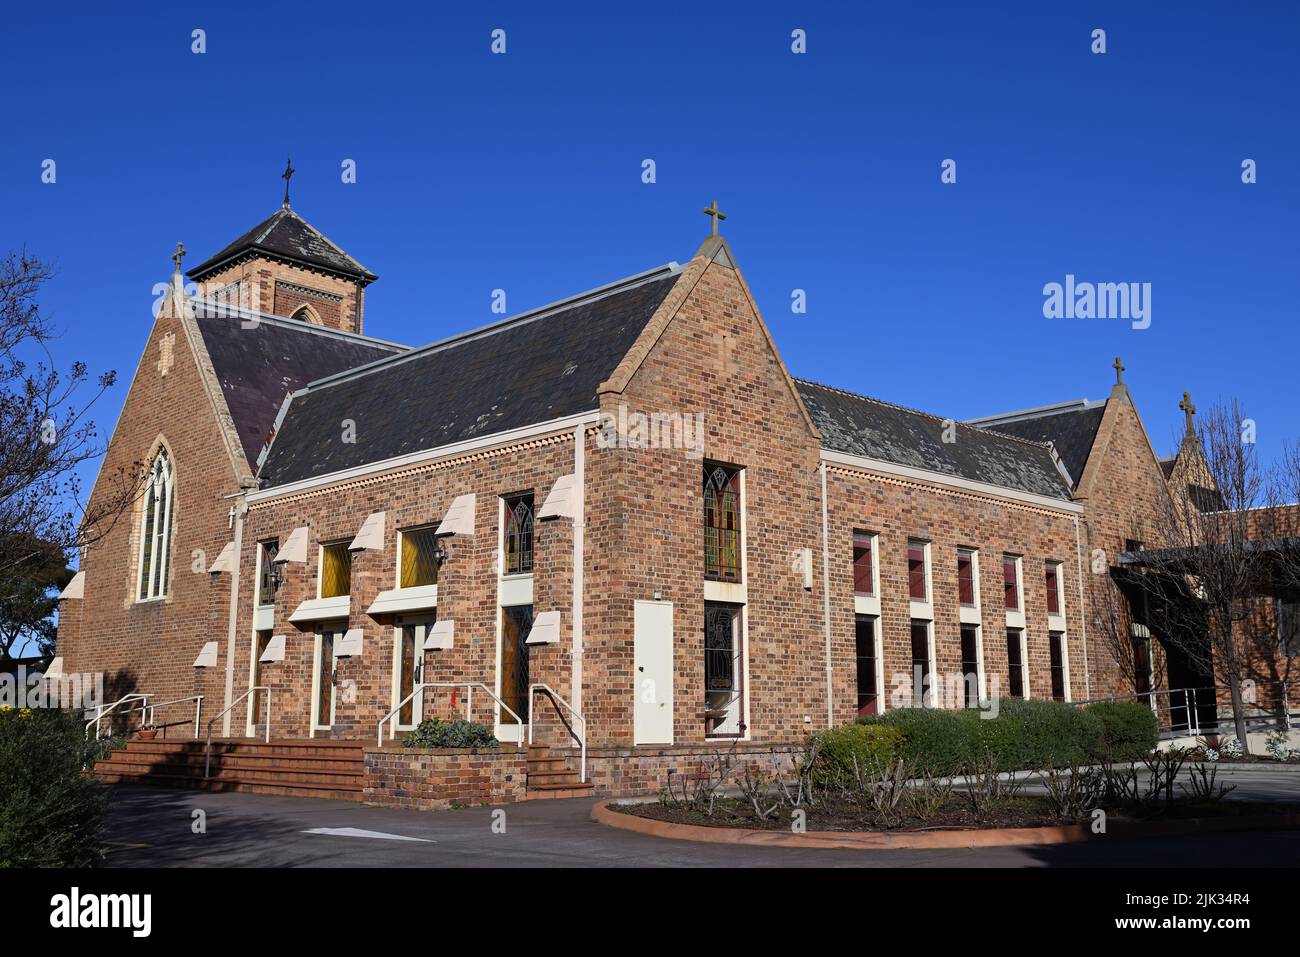 Exterior of St Finbar's Catholic Church, located on Centre Rd, during a sunny day Stock Photo